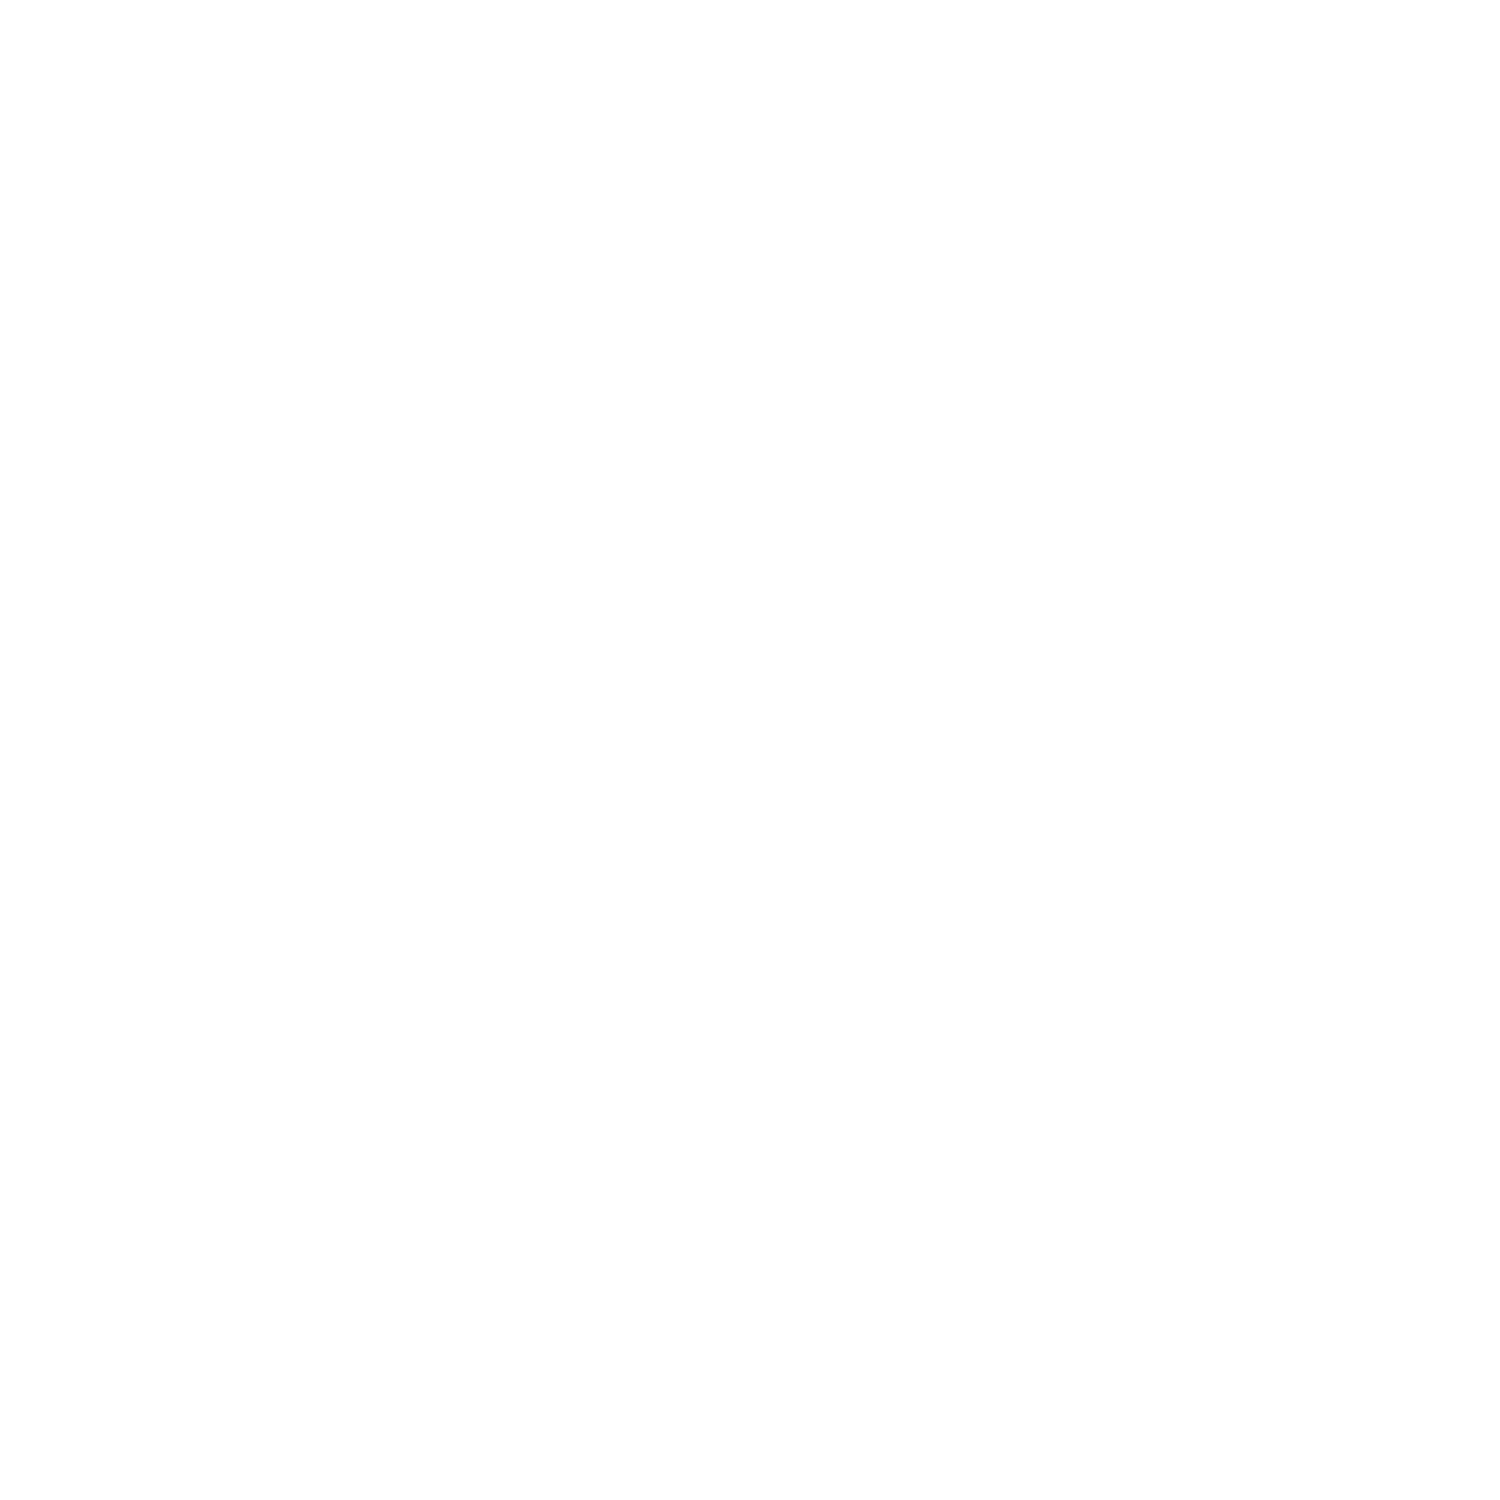 Exclusive Sterling Silver Jewelry in Joshua Tree